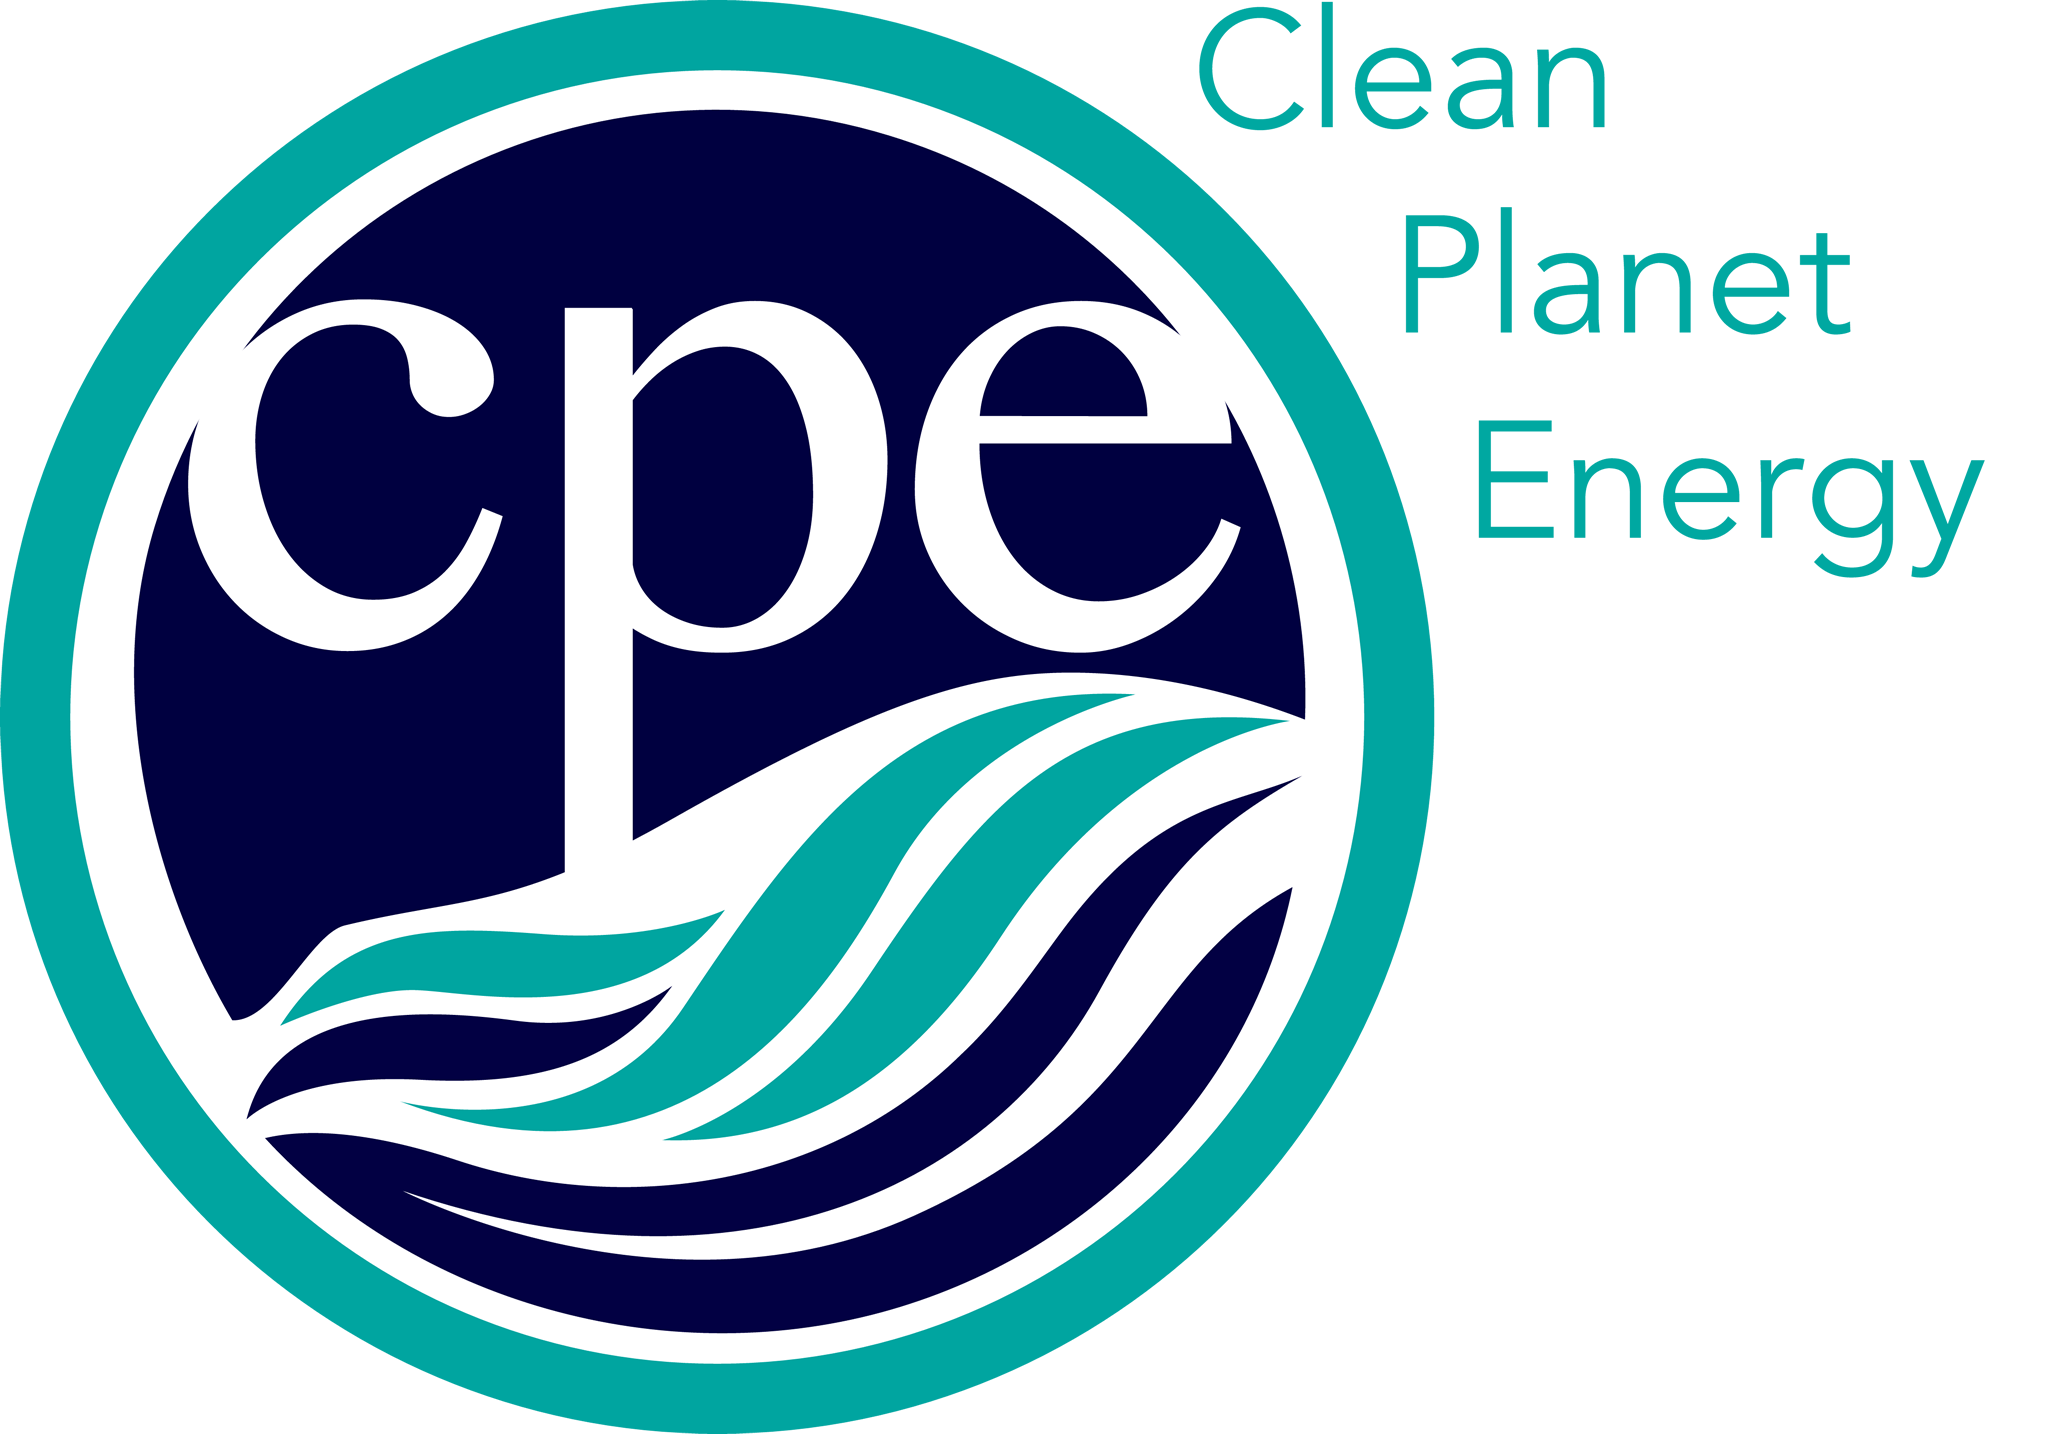 Clean Planet Energy, Tuesday, November 15, 2022, Press release picture